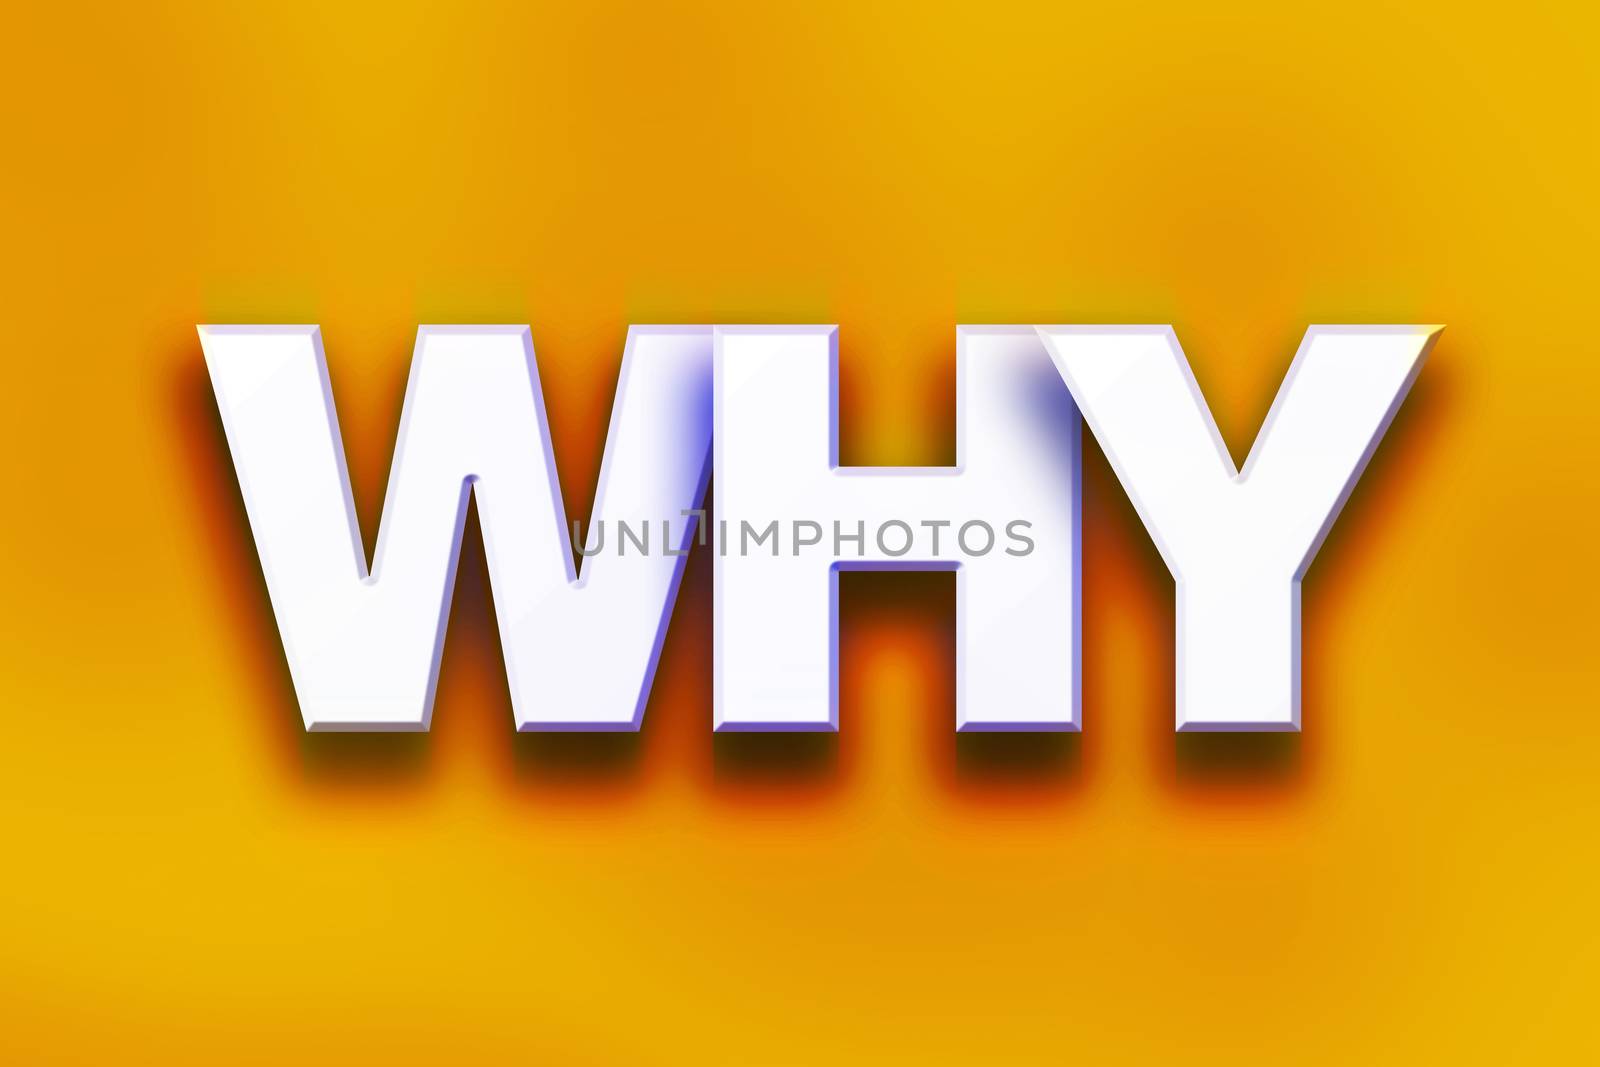 The word "Why" written in white 3D letters on a colorful background concept and theme.